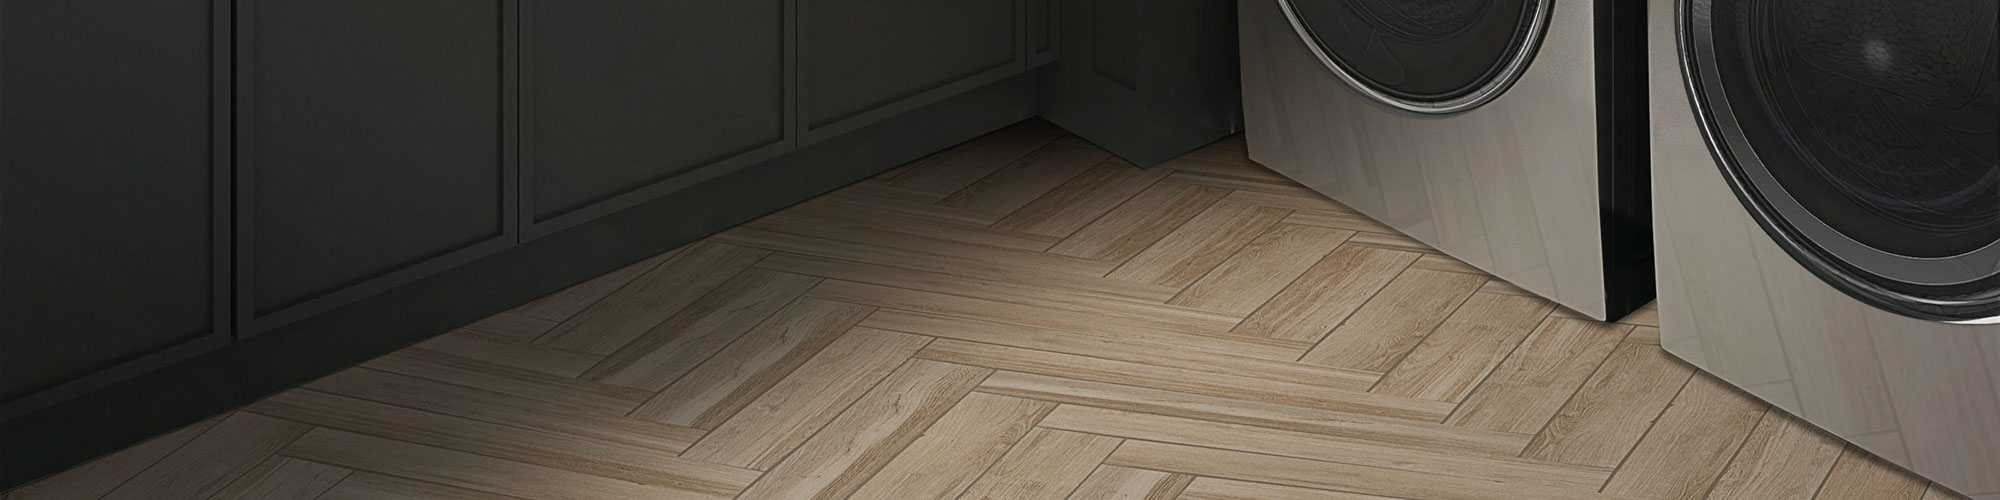 Closeup of laundry room floor of with tile laid in a herringbone pattern that looks like wood flooring, front-loading washer and dryer, and brown cabinets.